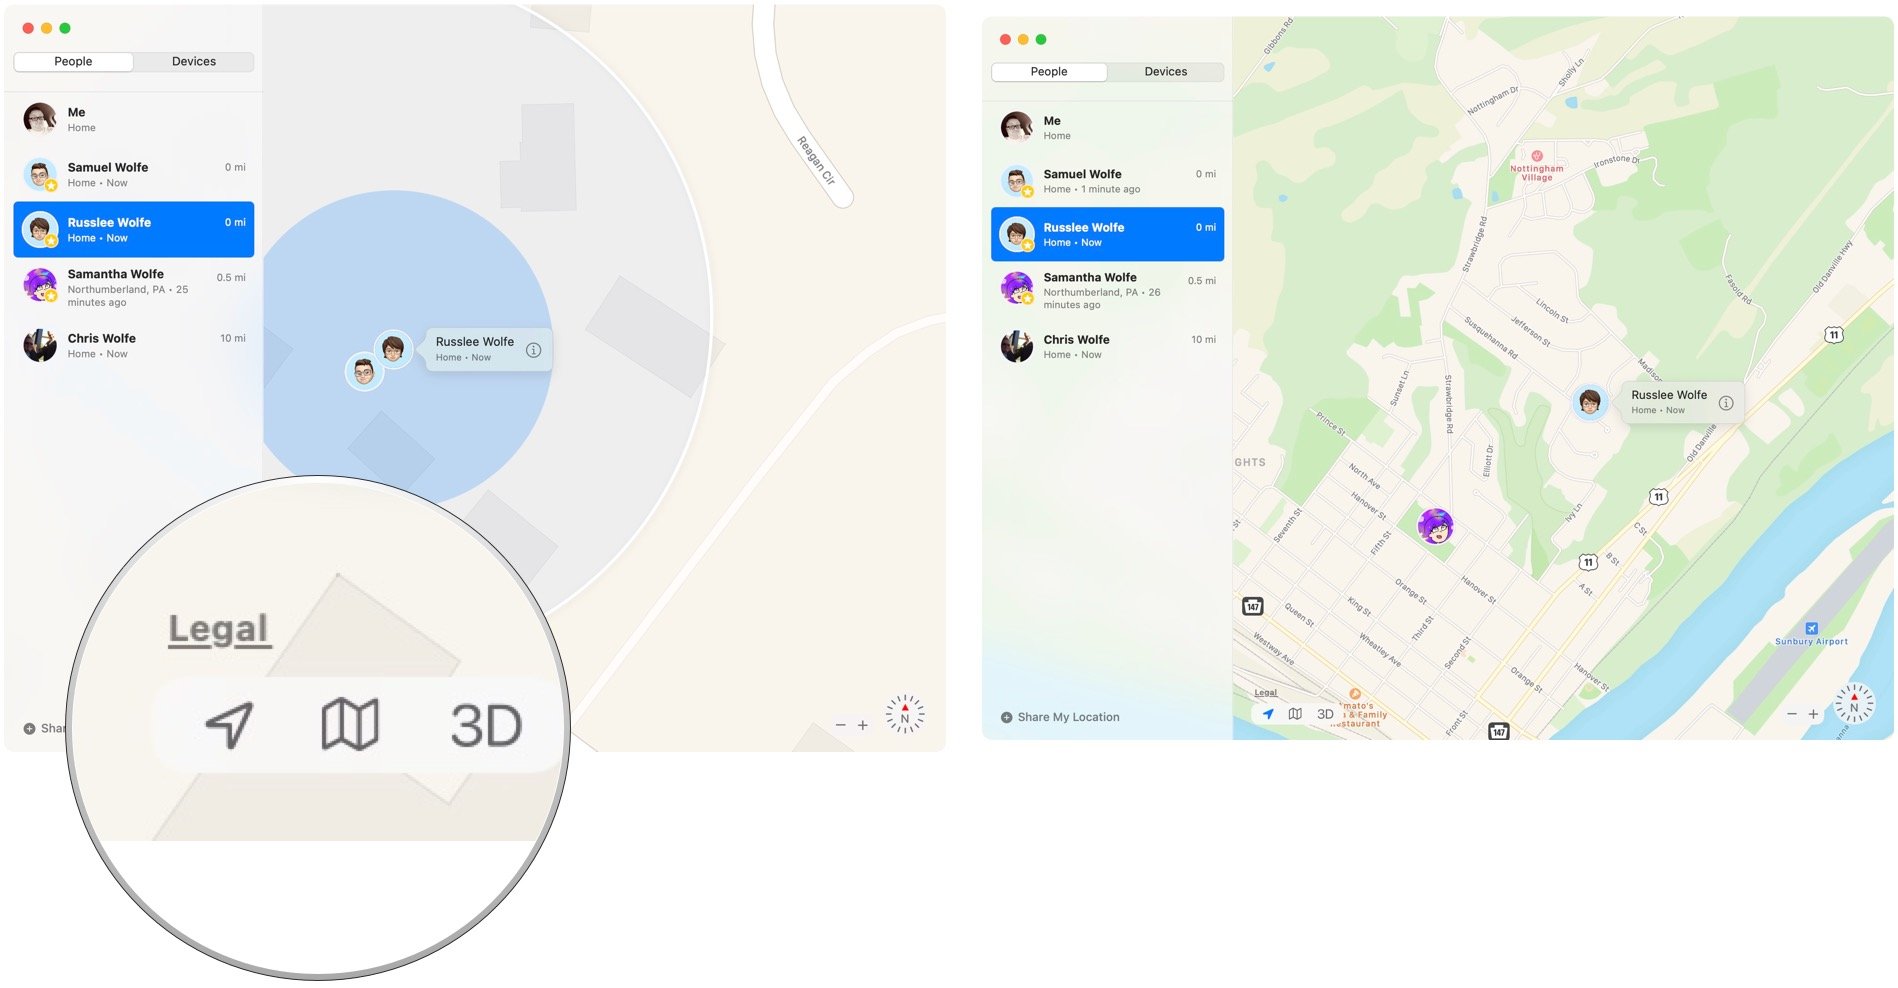 To track your friends with Find My on Mac, select the location icon to find your current location on the map. 